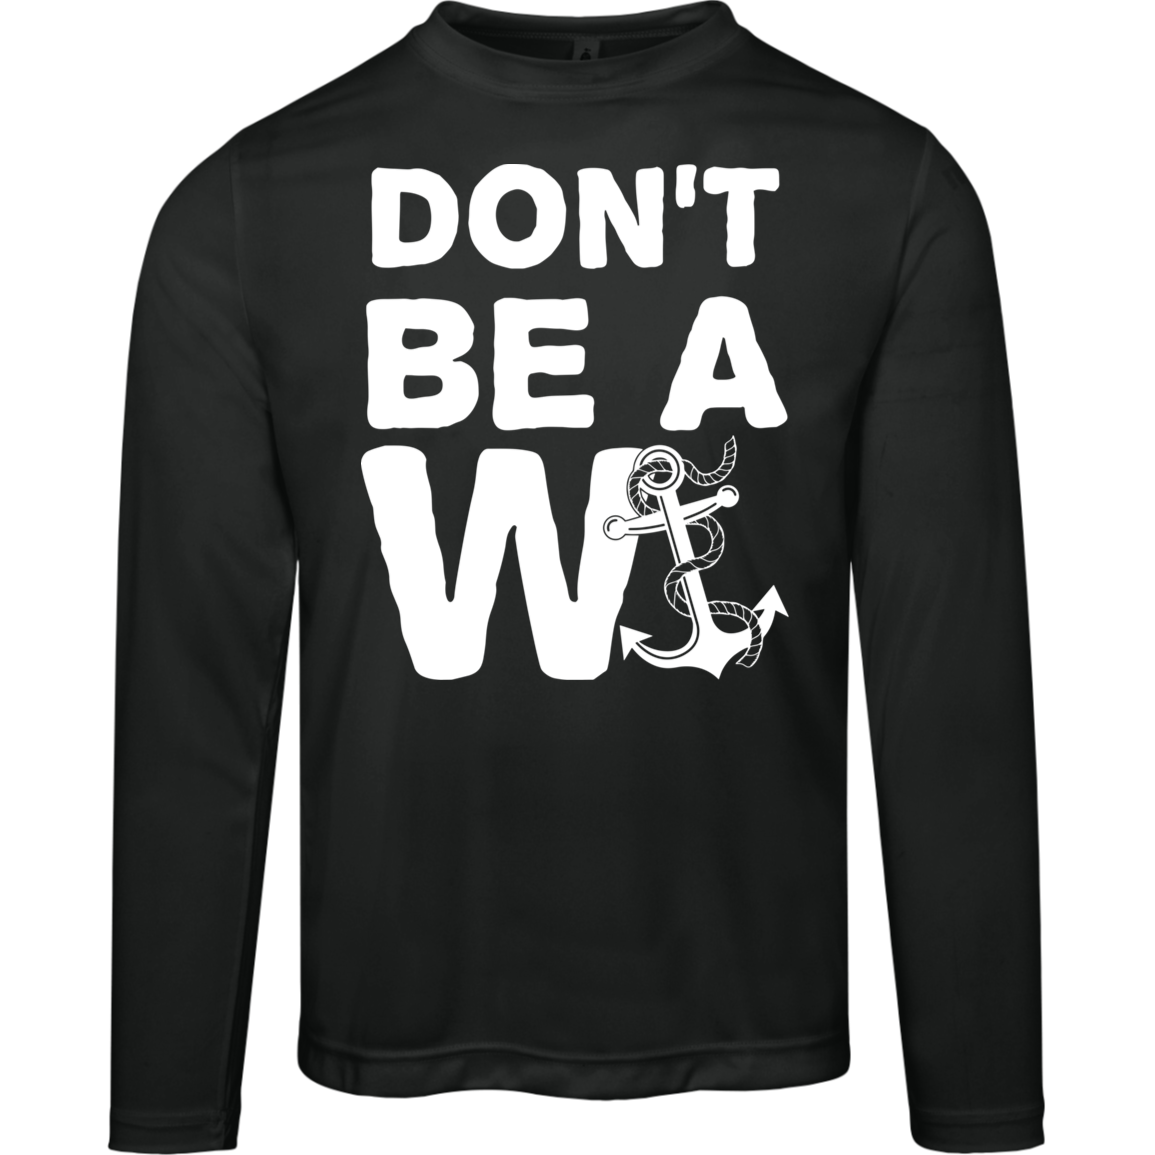 ***2 SIDED***  HRCL FL - Don't Be A Wanker - 2 Sided - UV 40+ Protection TT11L Team 365 Mens Zone Long Sleeve Tee